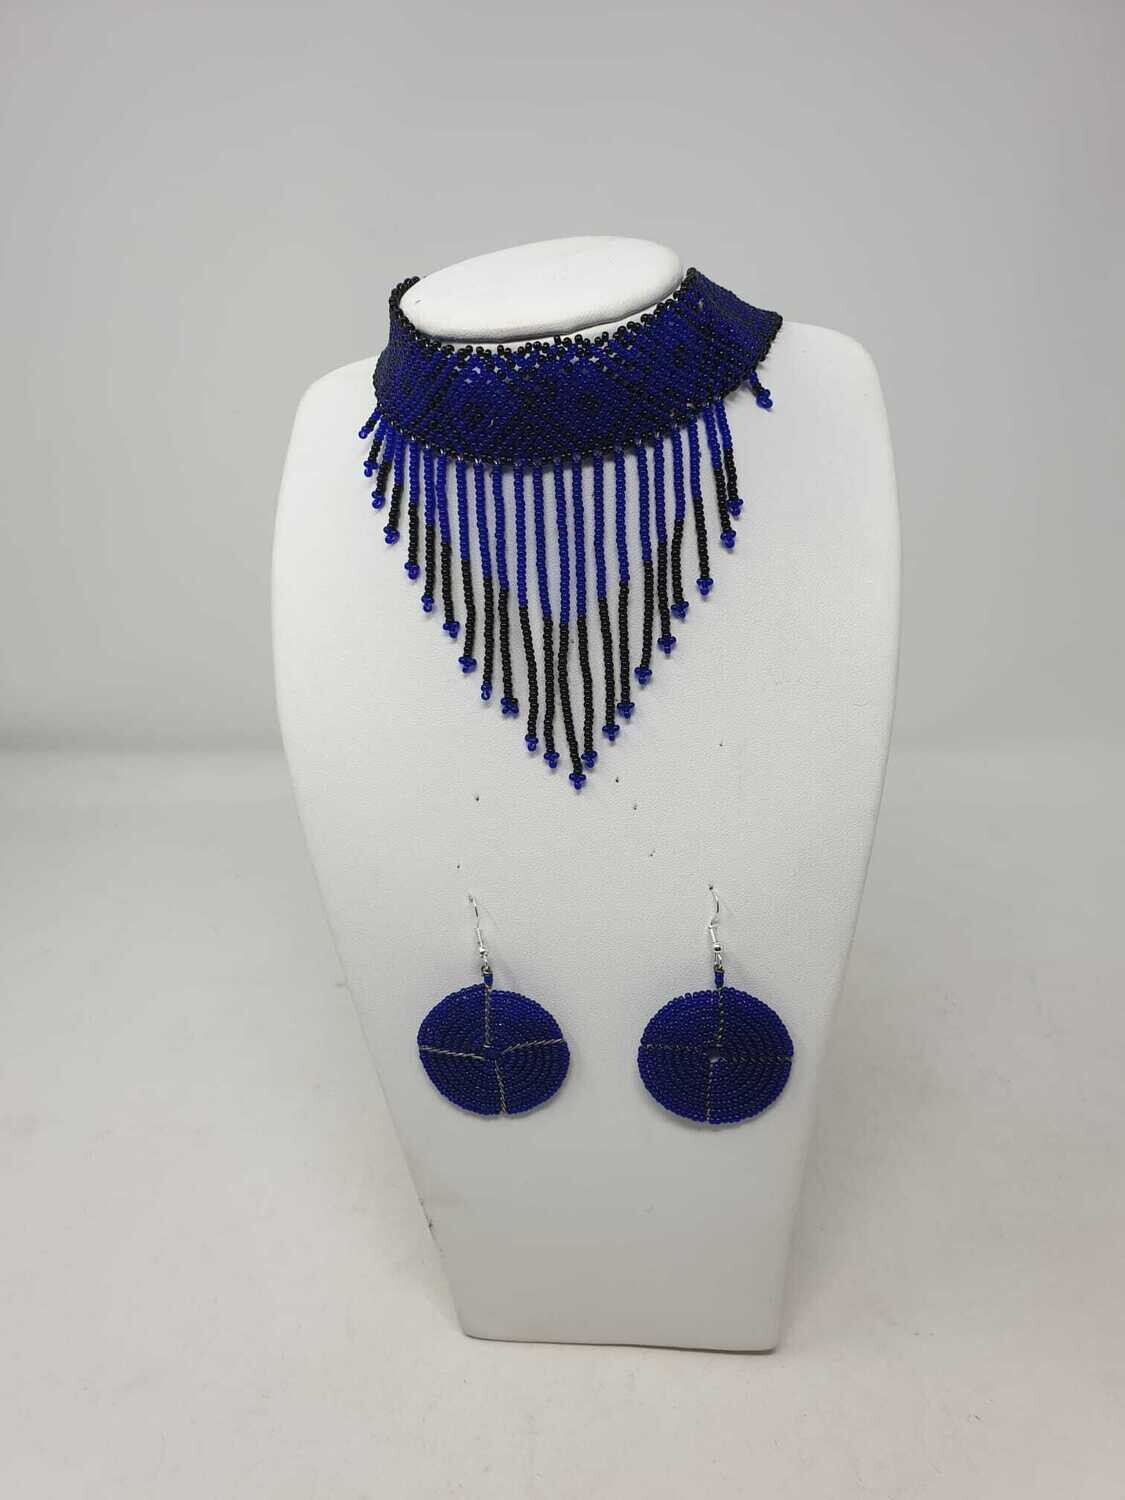 Handbeaded Necklace with Matching Earrings - Black and Royal Blue